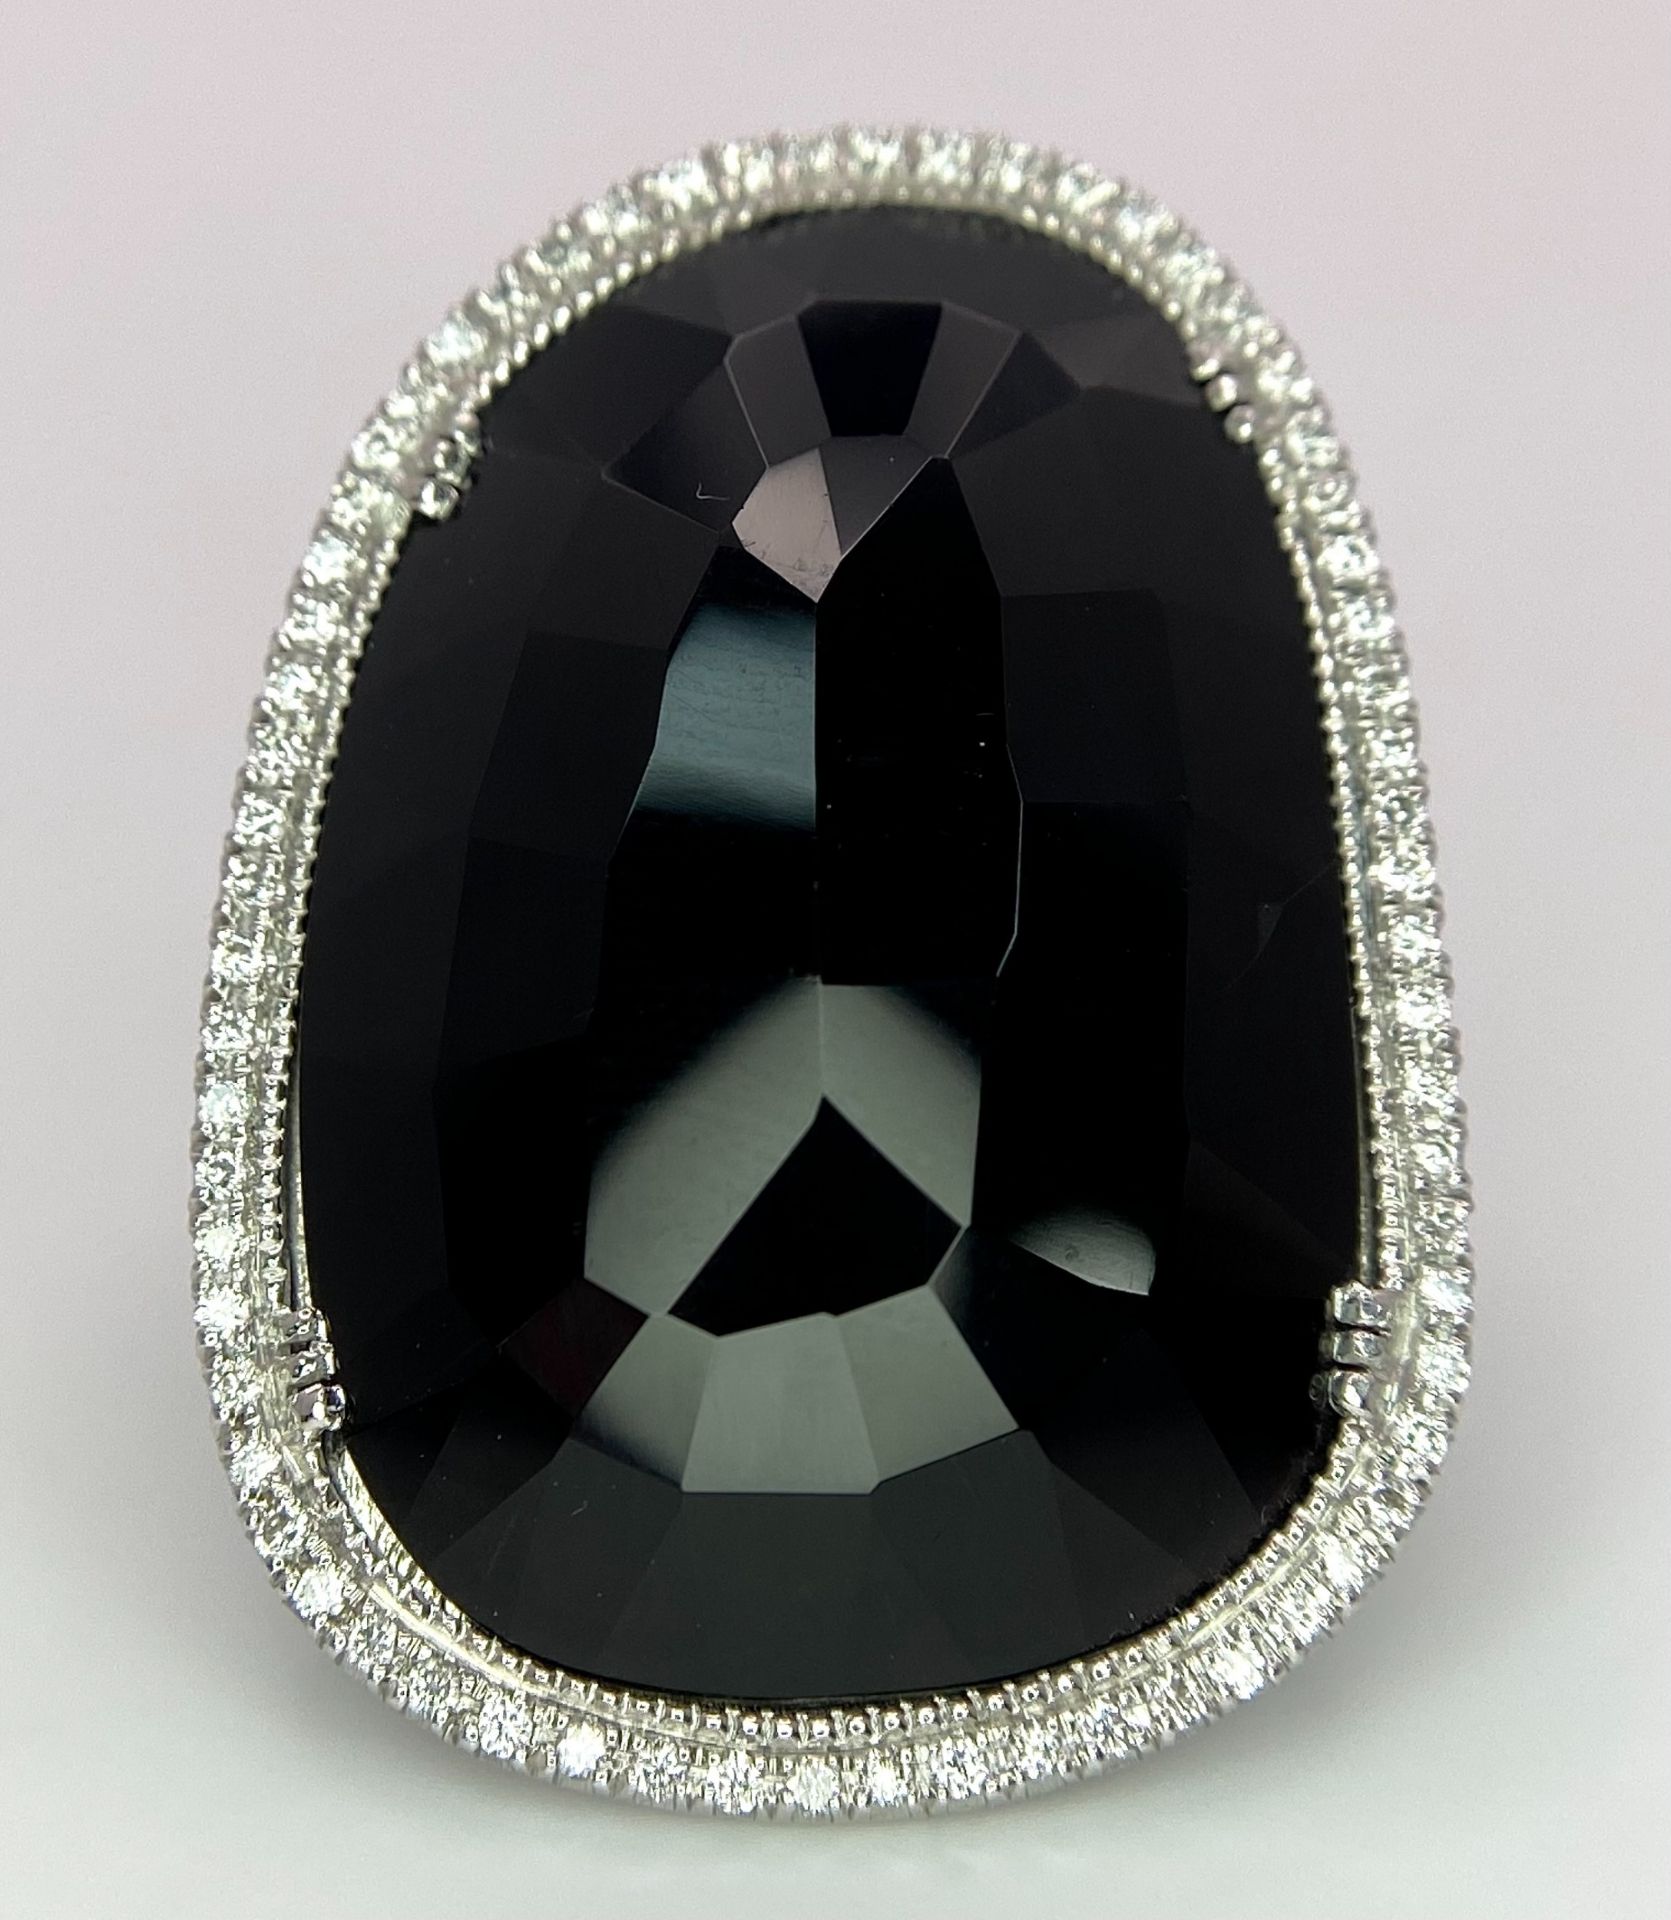 A Beautiful 18k White Gold Black Onyx and Diamond Ladies Dress Ring. Faceted black onyx with a - Image 4 of 8